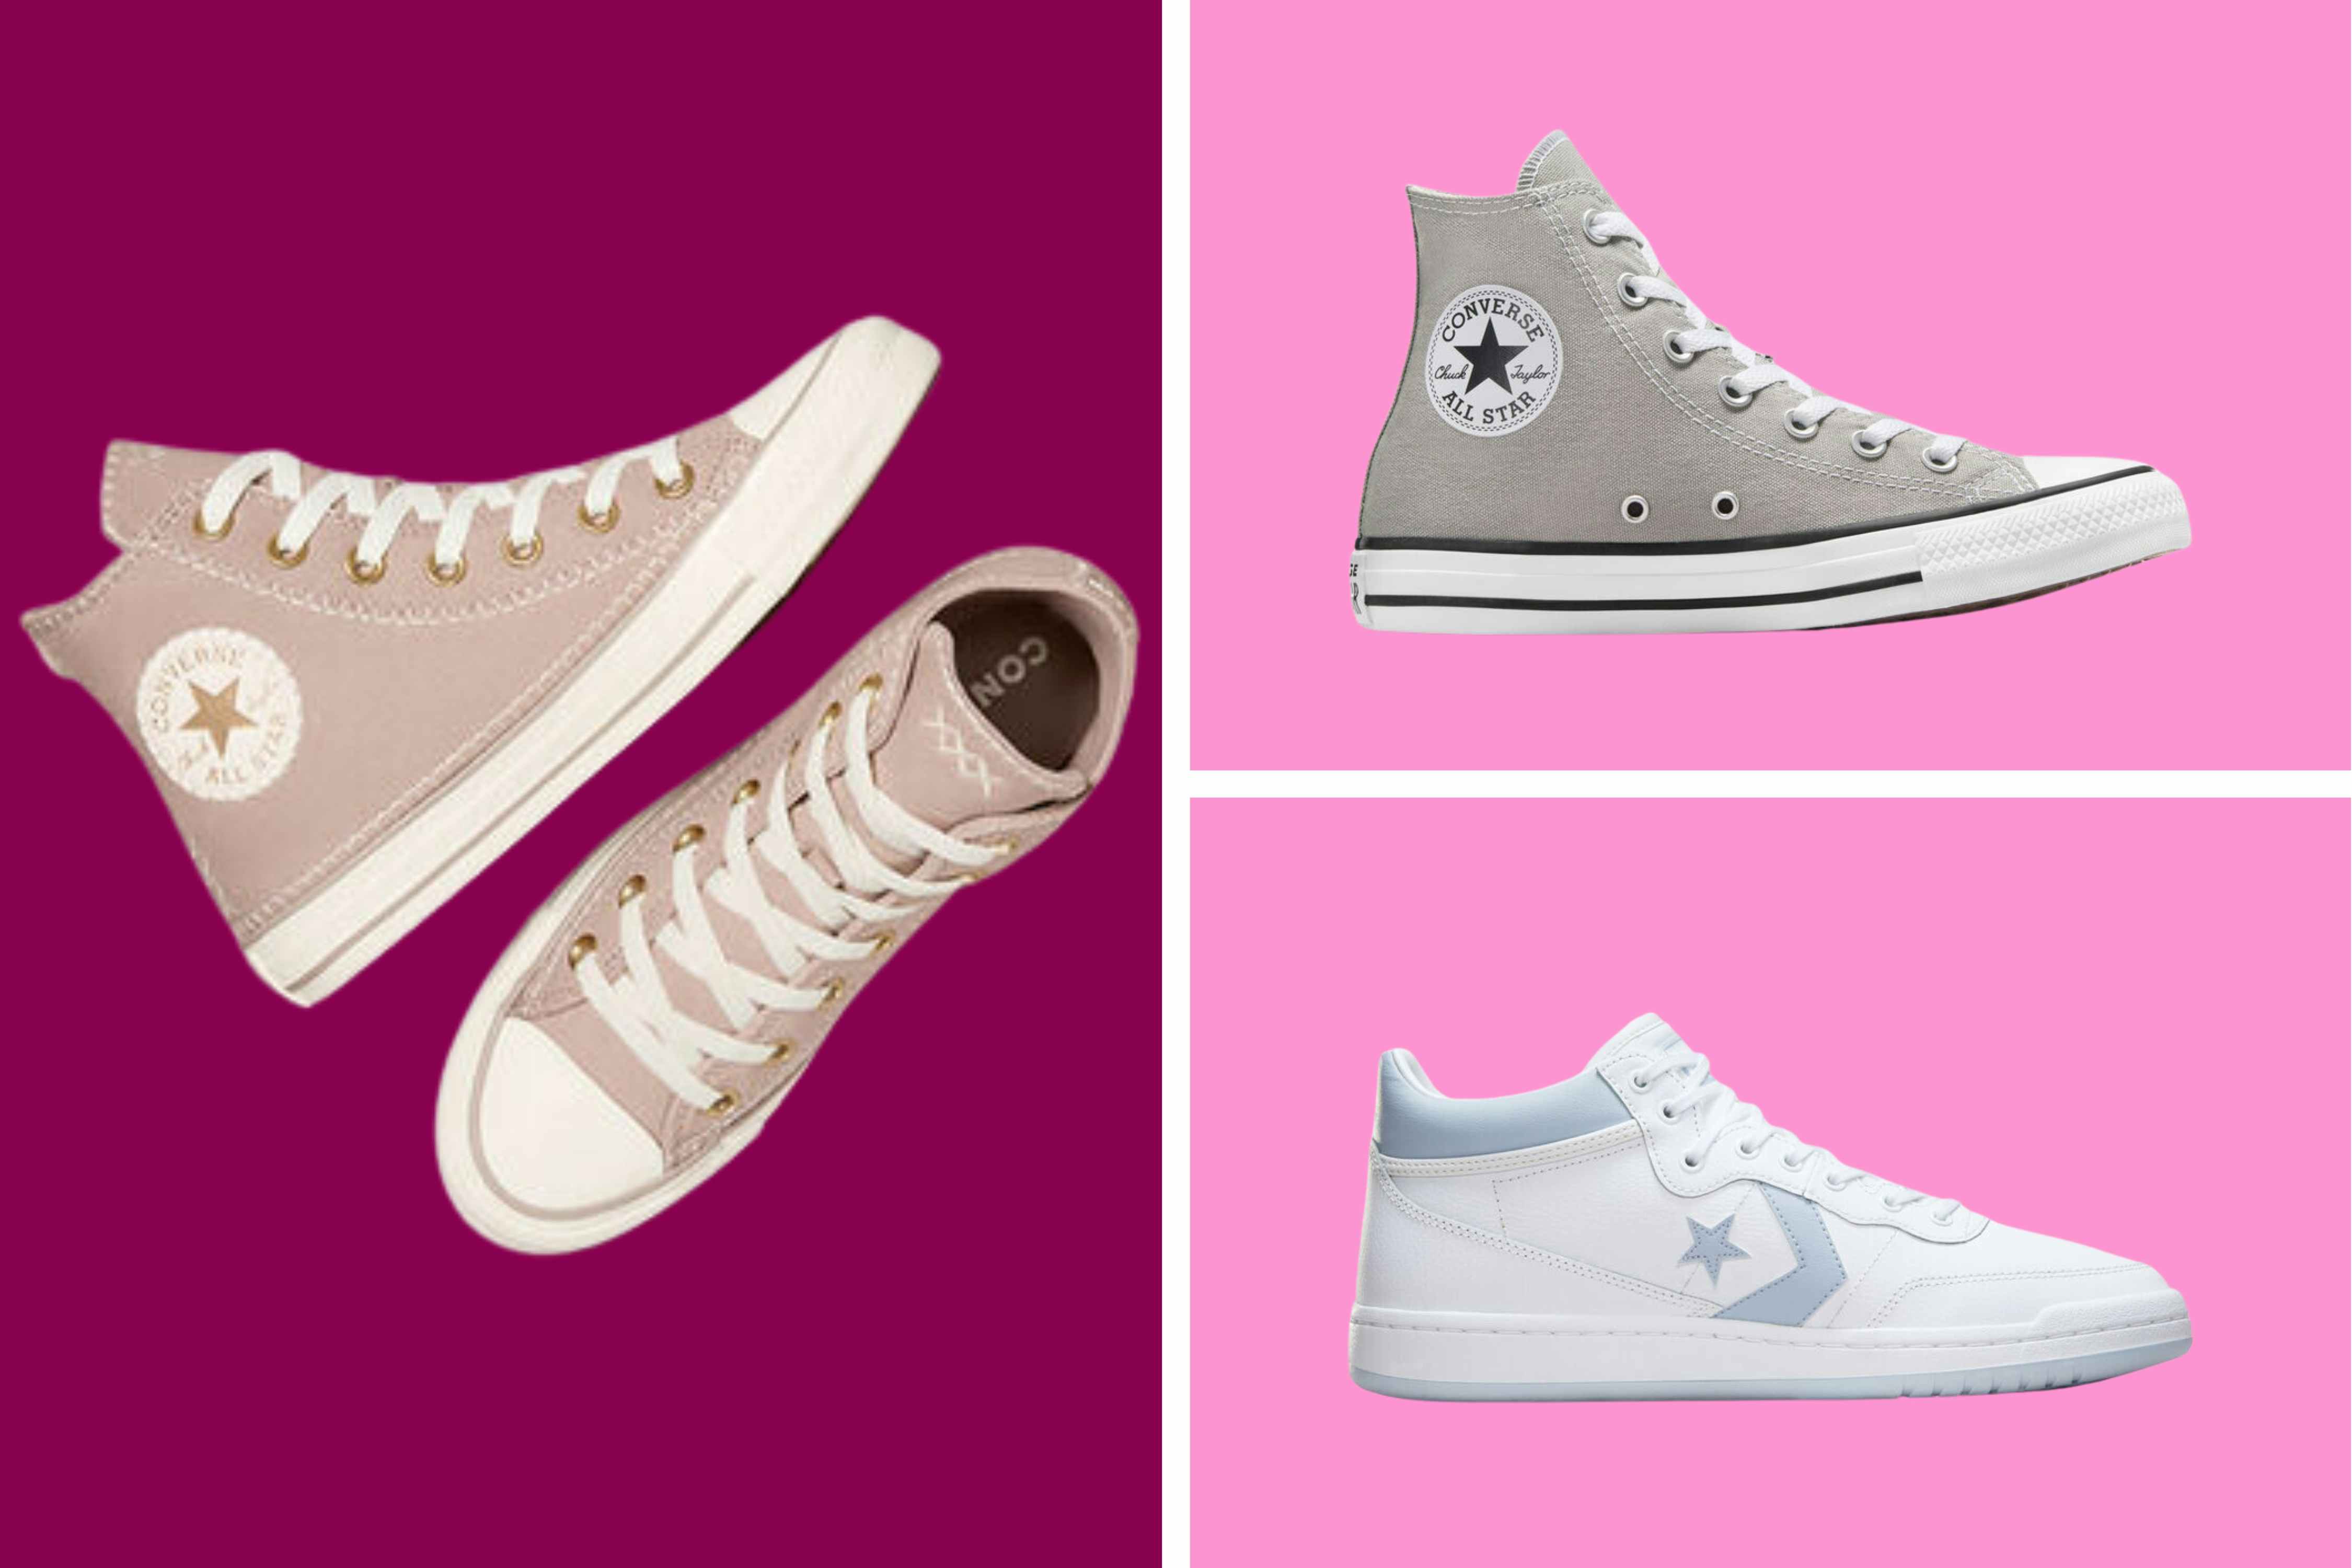 Take Advantage of an Extra 40% Off at Converse — Shoes Start at $23.98